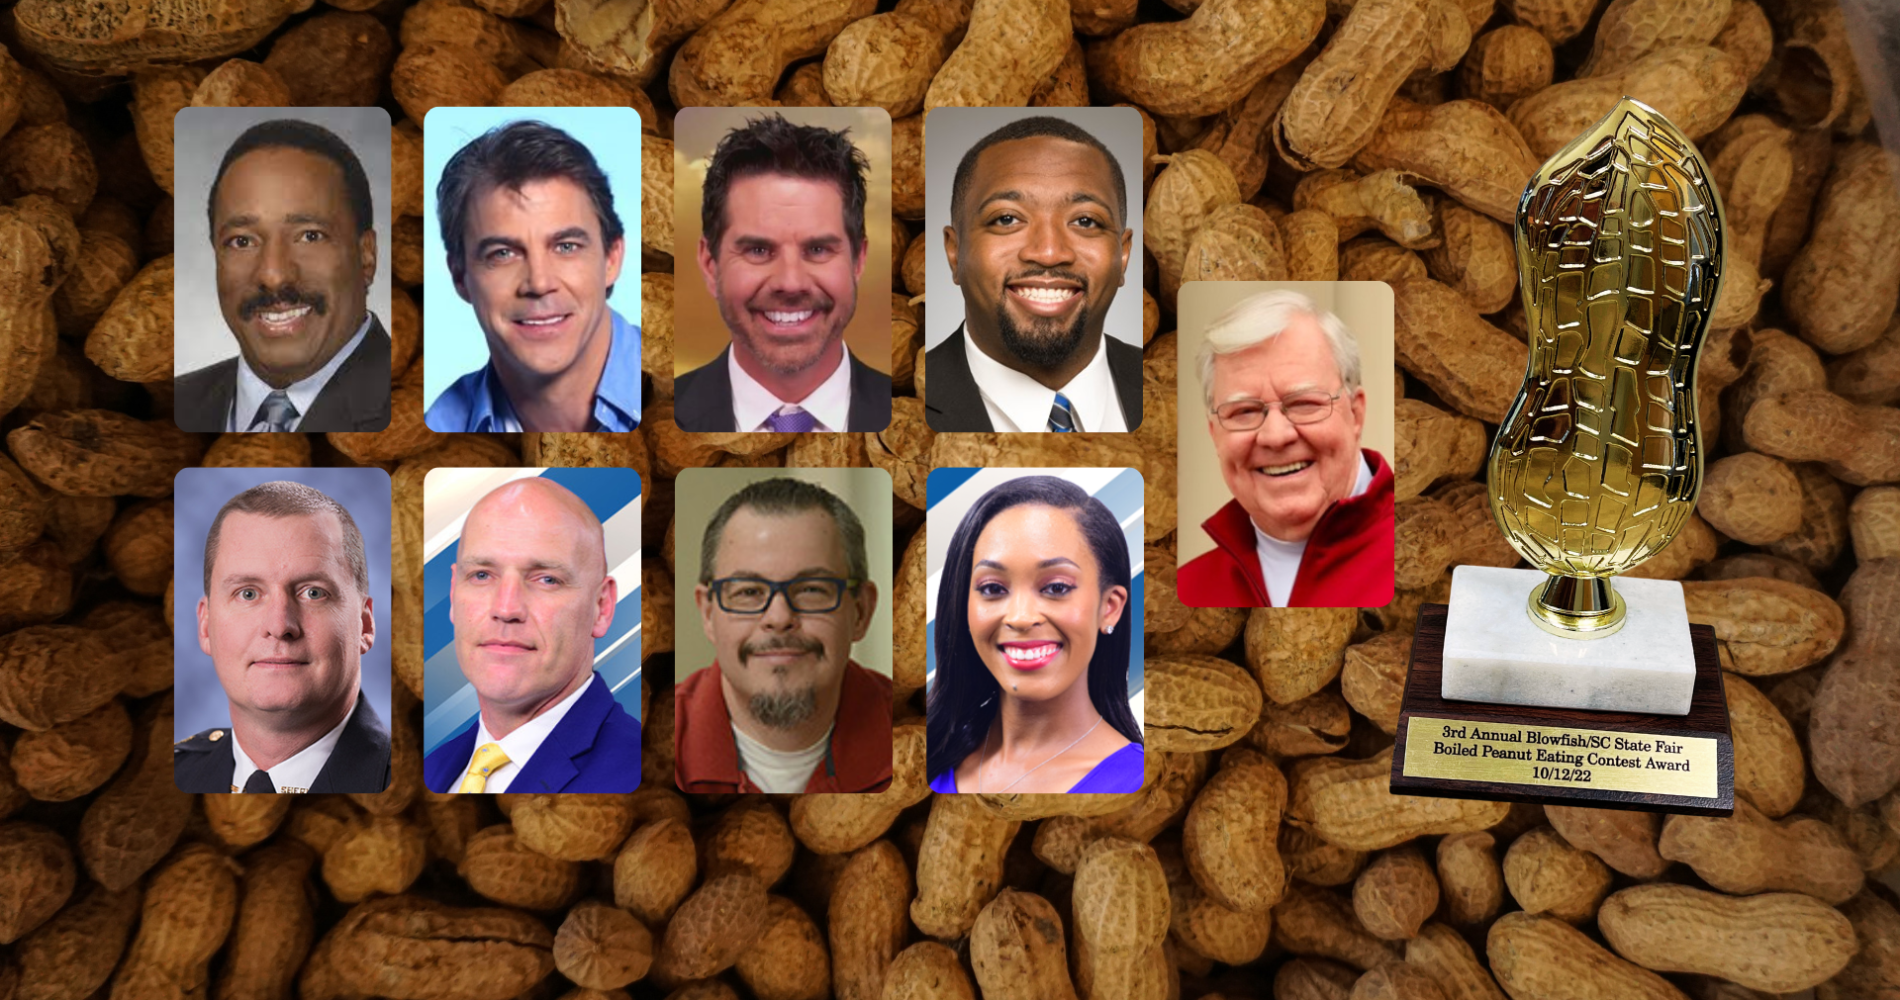 3rd Annual Boiled Peanut Eating Contest set for Oct. 12